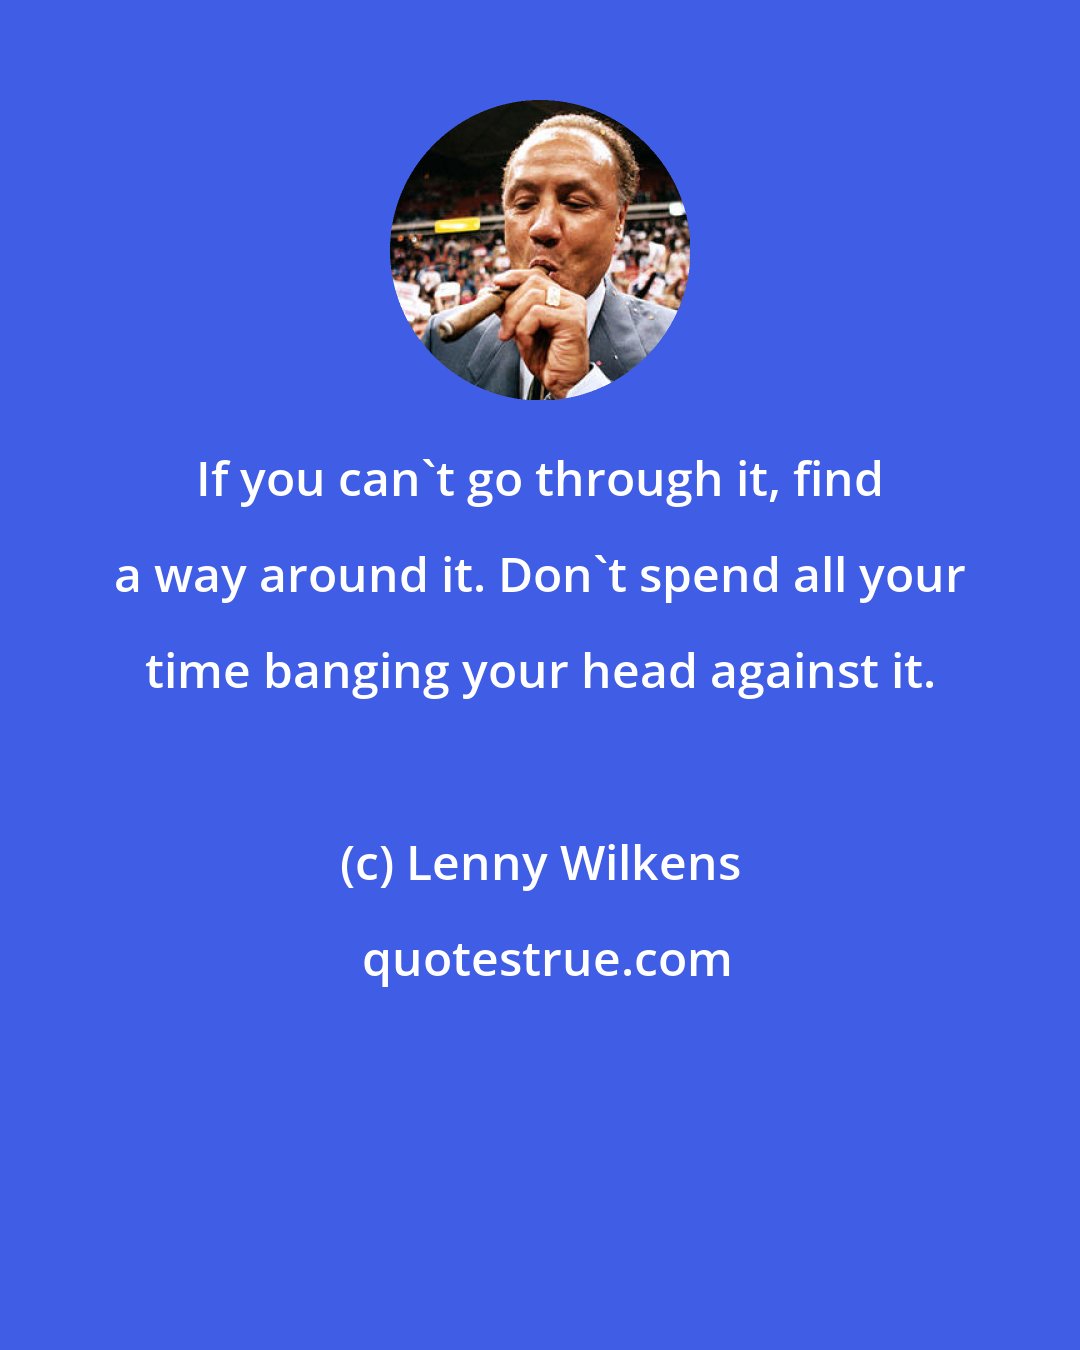 Lenny Wilkens: If you can't go through it, find a way around it. Don't spend all your time banging your head against it.